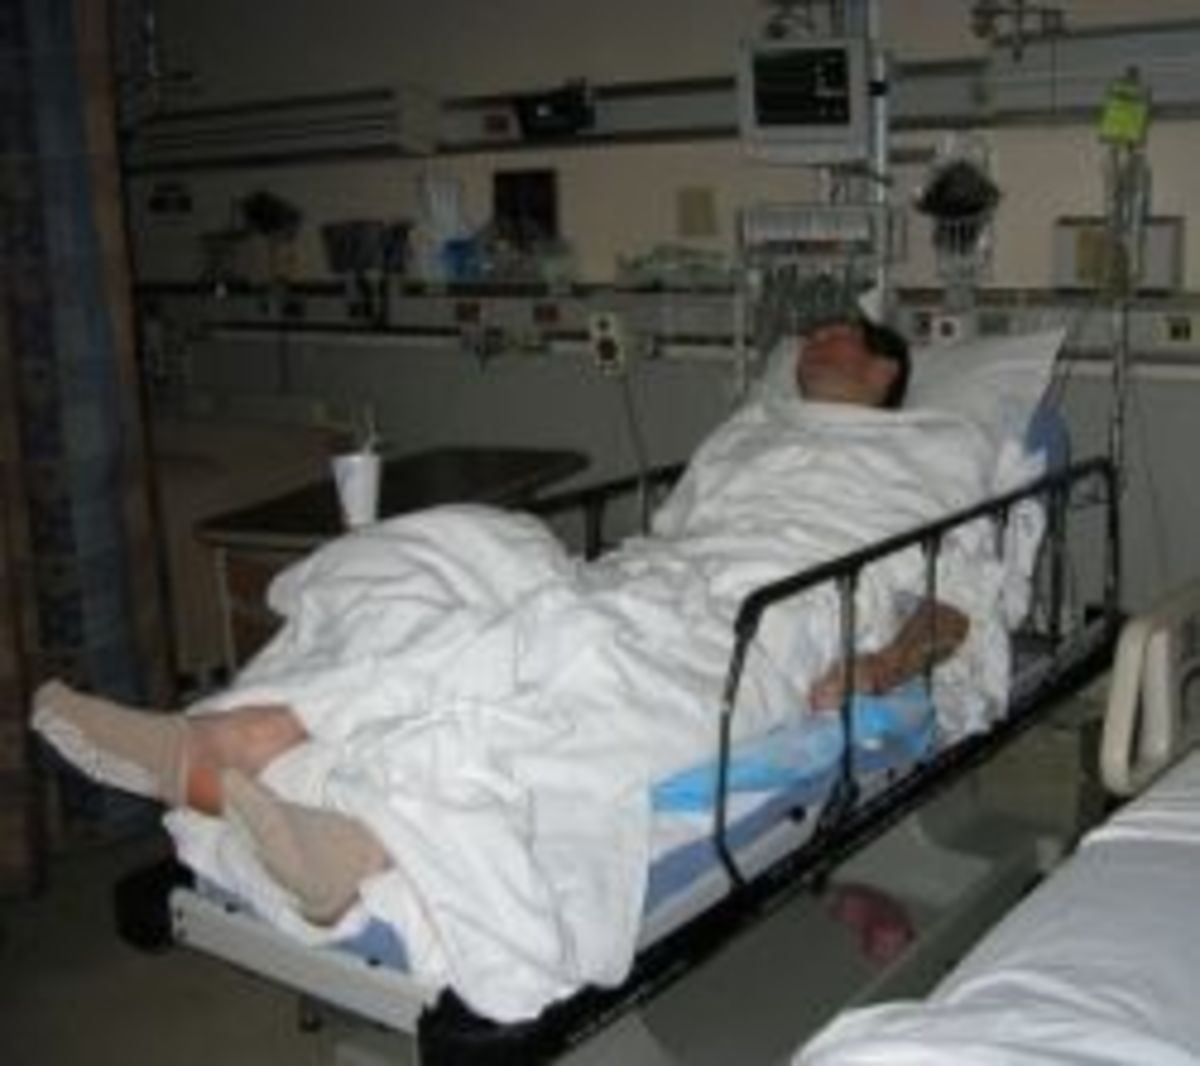 hospital bed, recovering from anesthesia